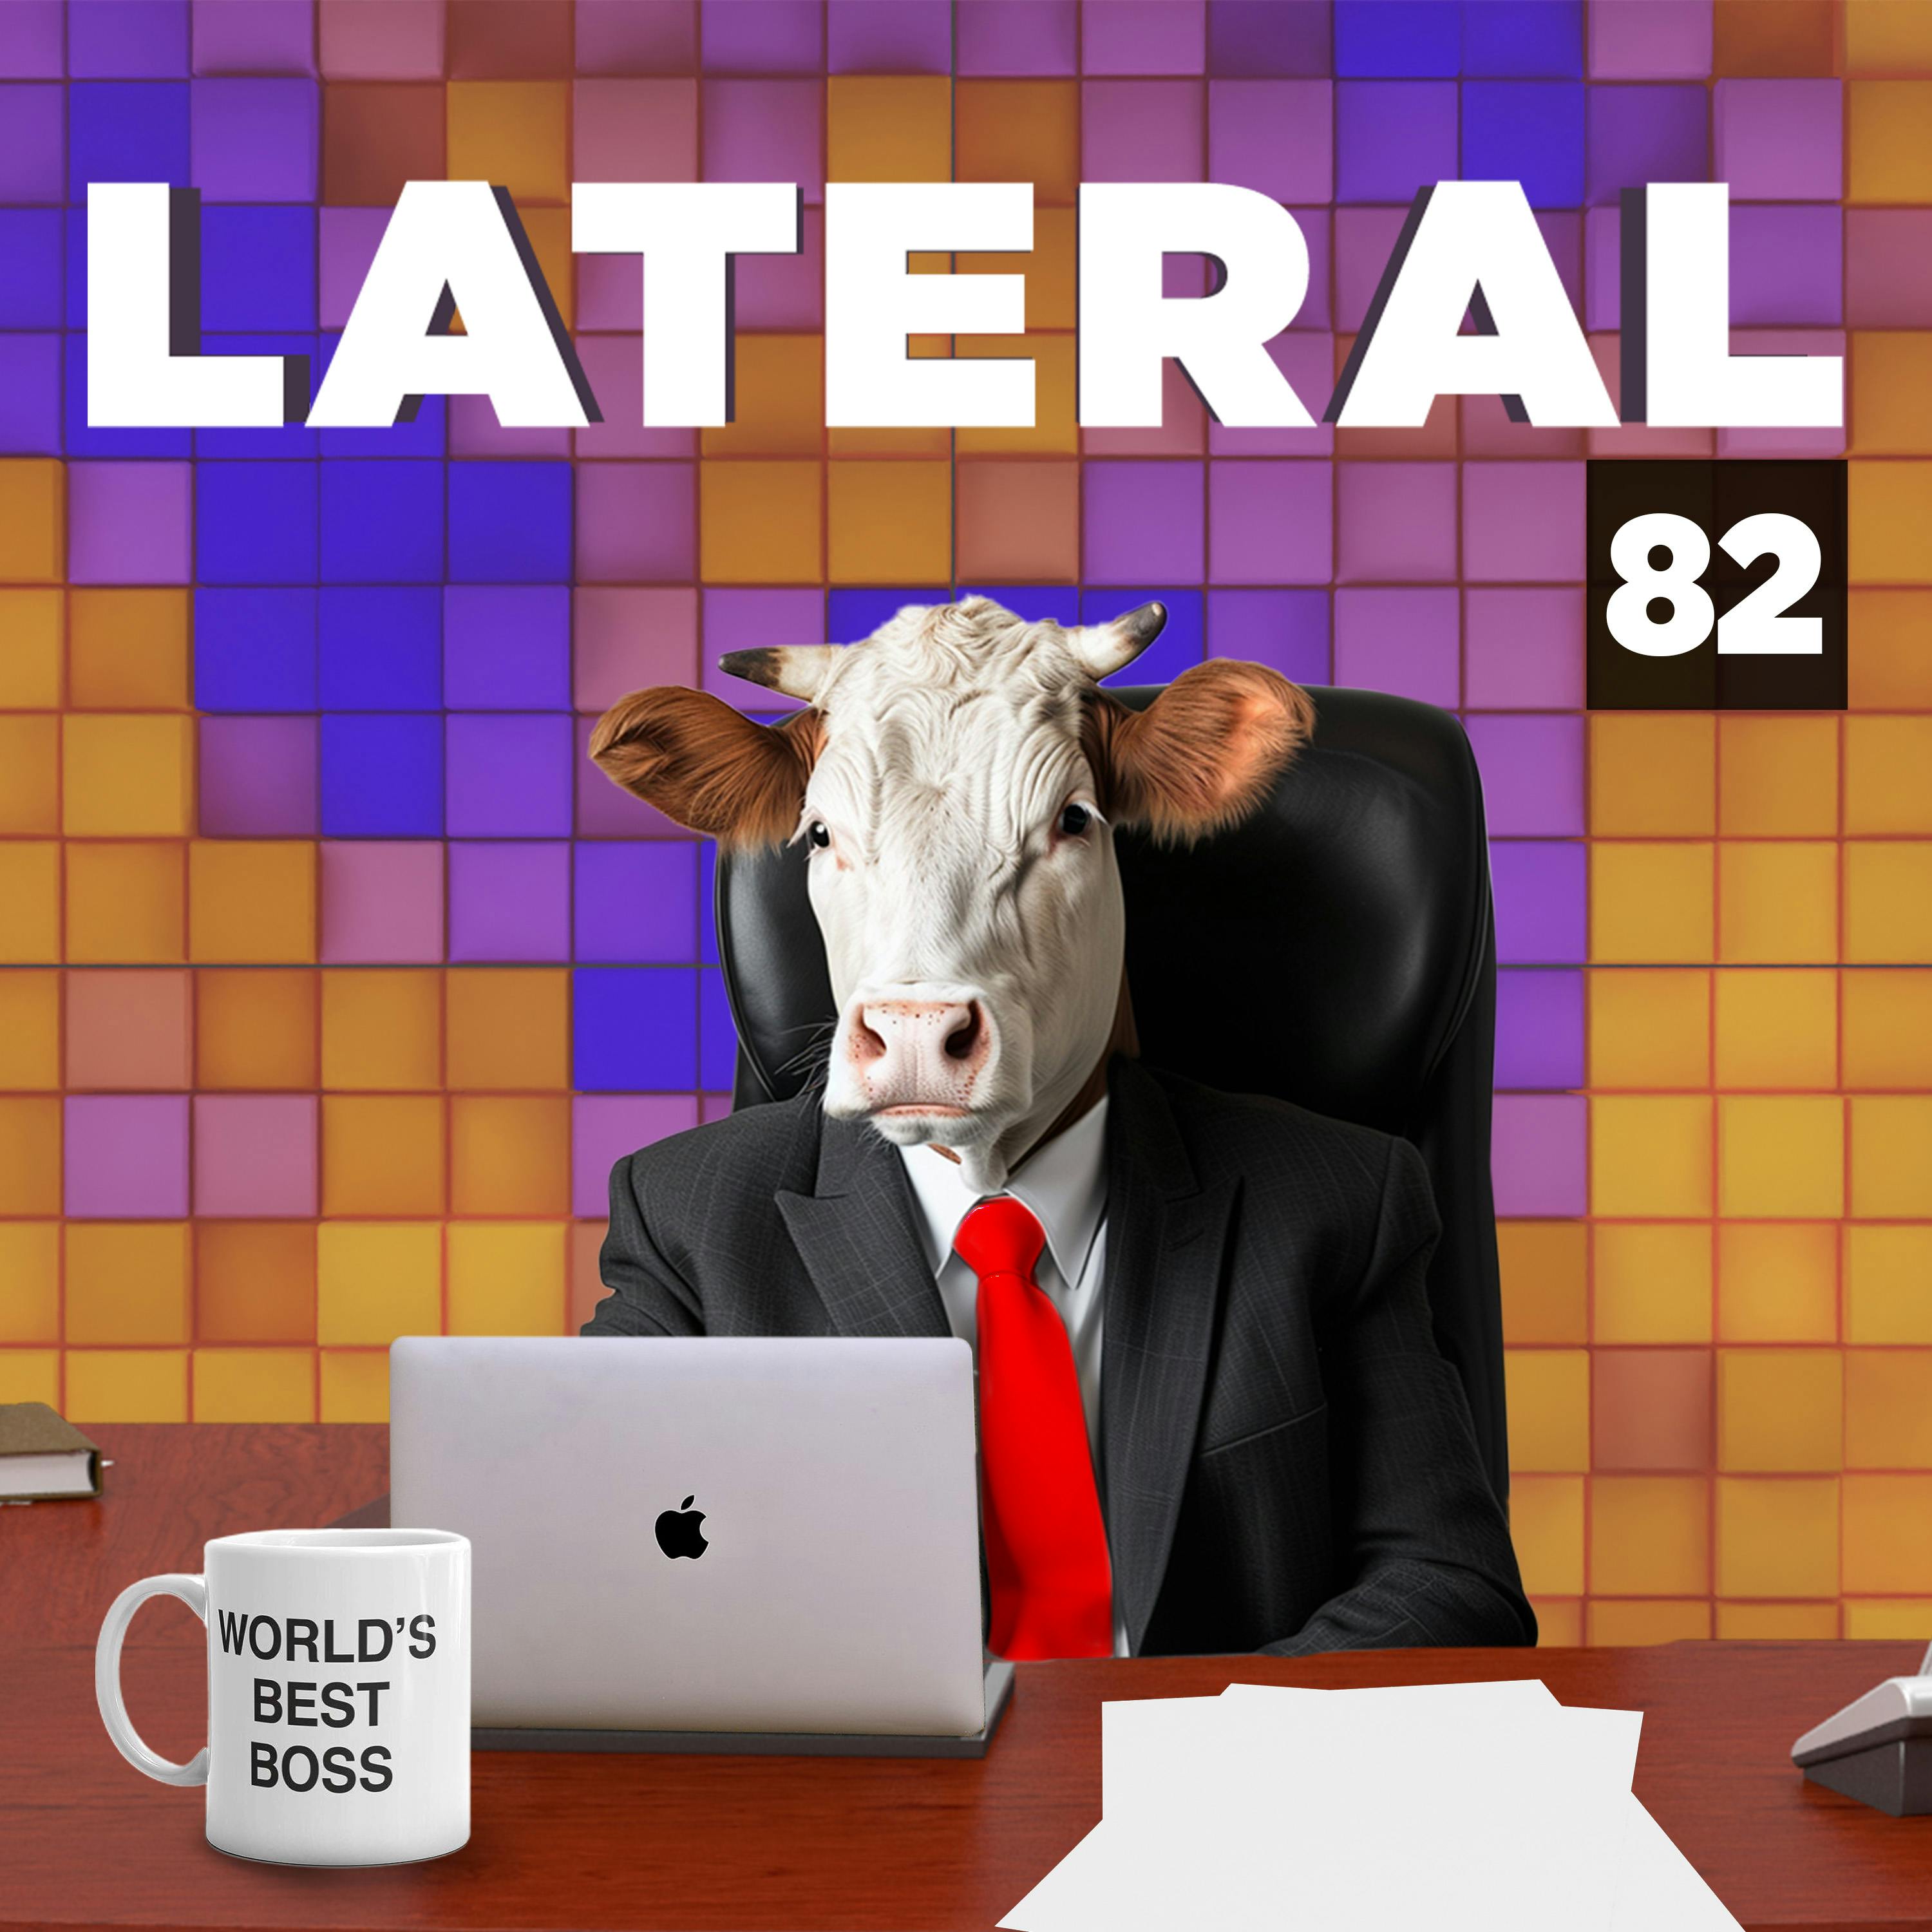 82: Cattle at the office